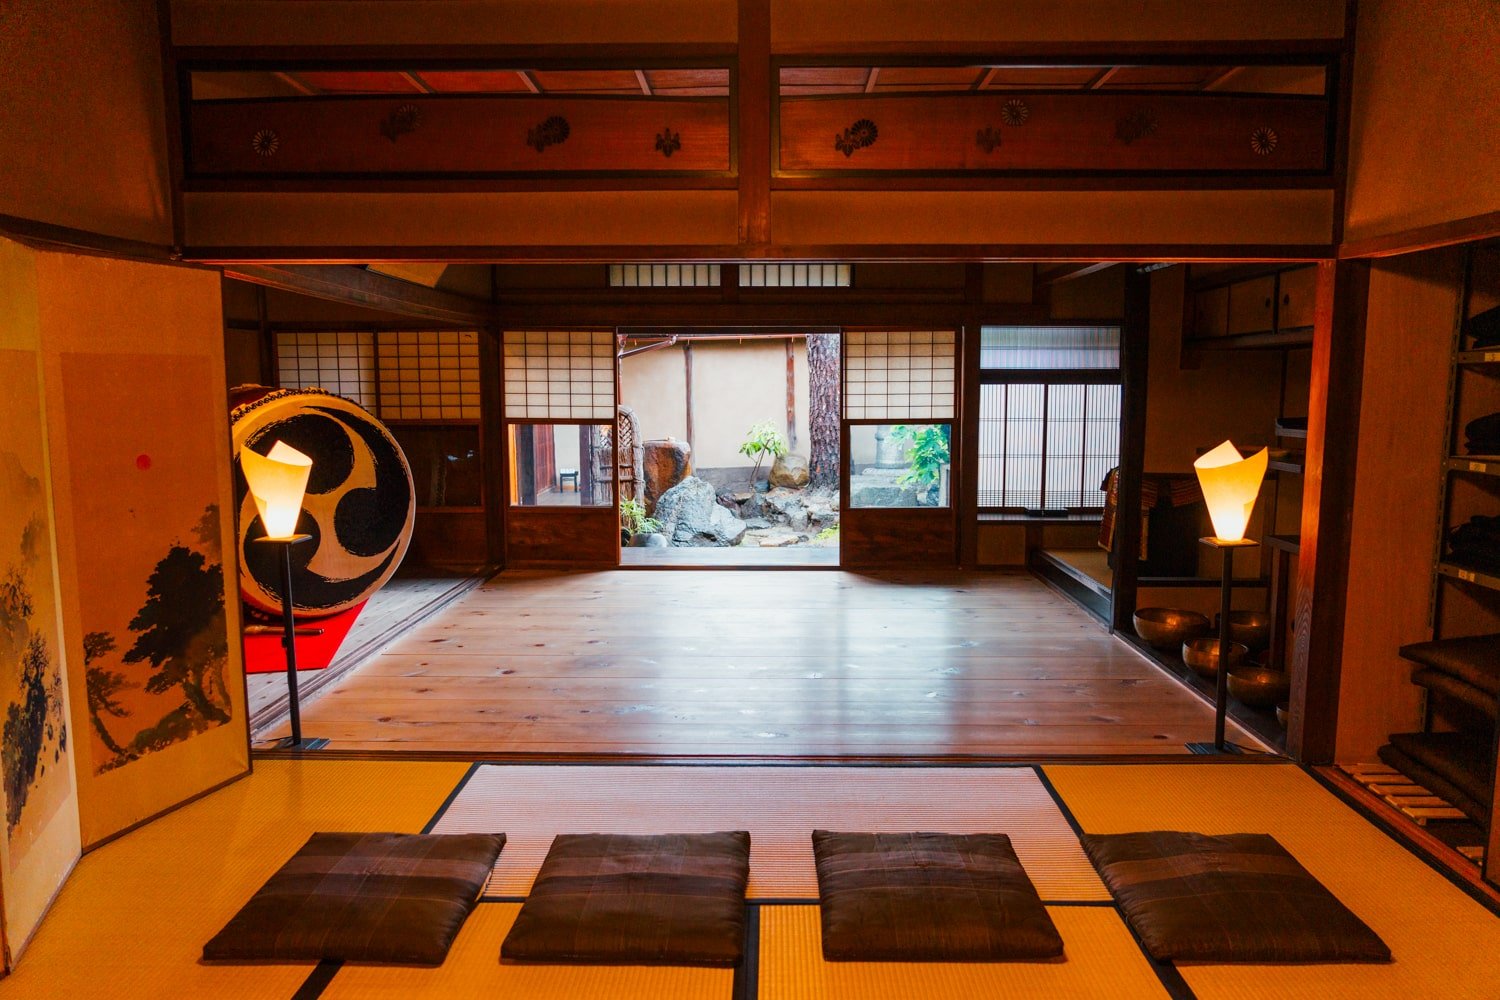 A traditional tatami room with cushions and wooden floor for hosting samurai katana demonstrations inside former samurai's home in Kyoto, Japan.